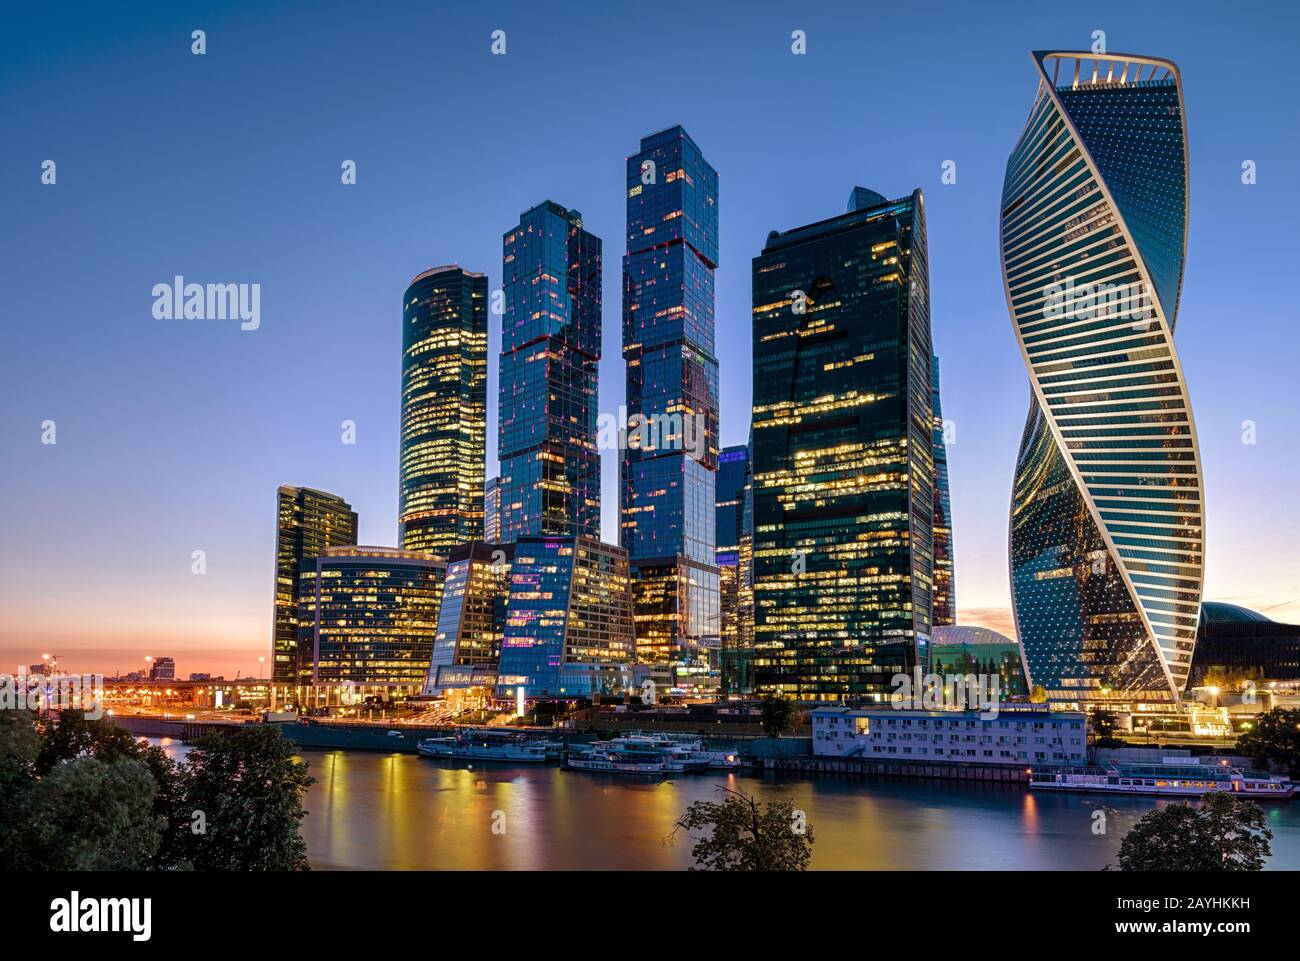 Moscow-City skyscrapers at Moskva River at night, Russia. It is a new district in the Moscow center. Evening view of office and residential tall build Stock Photo